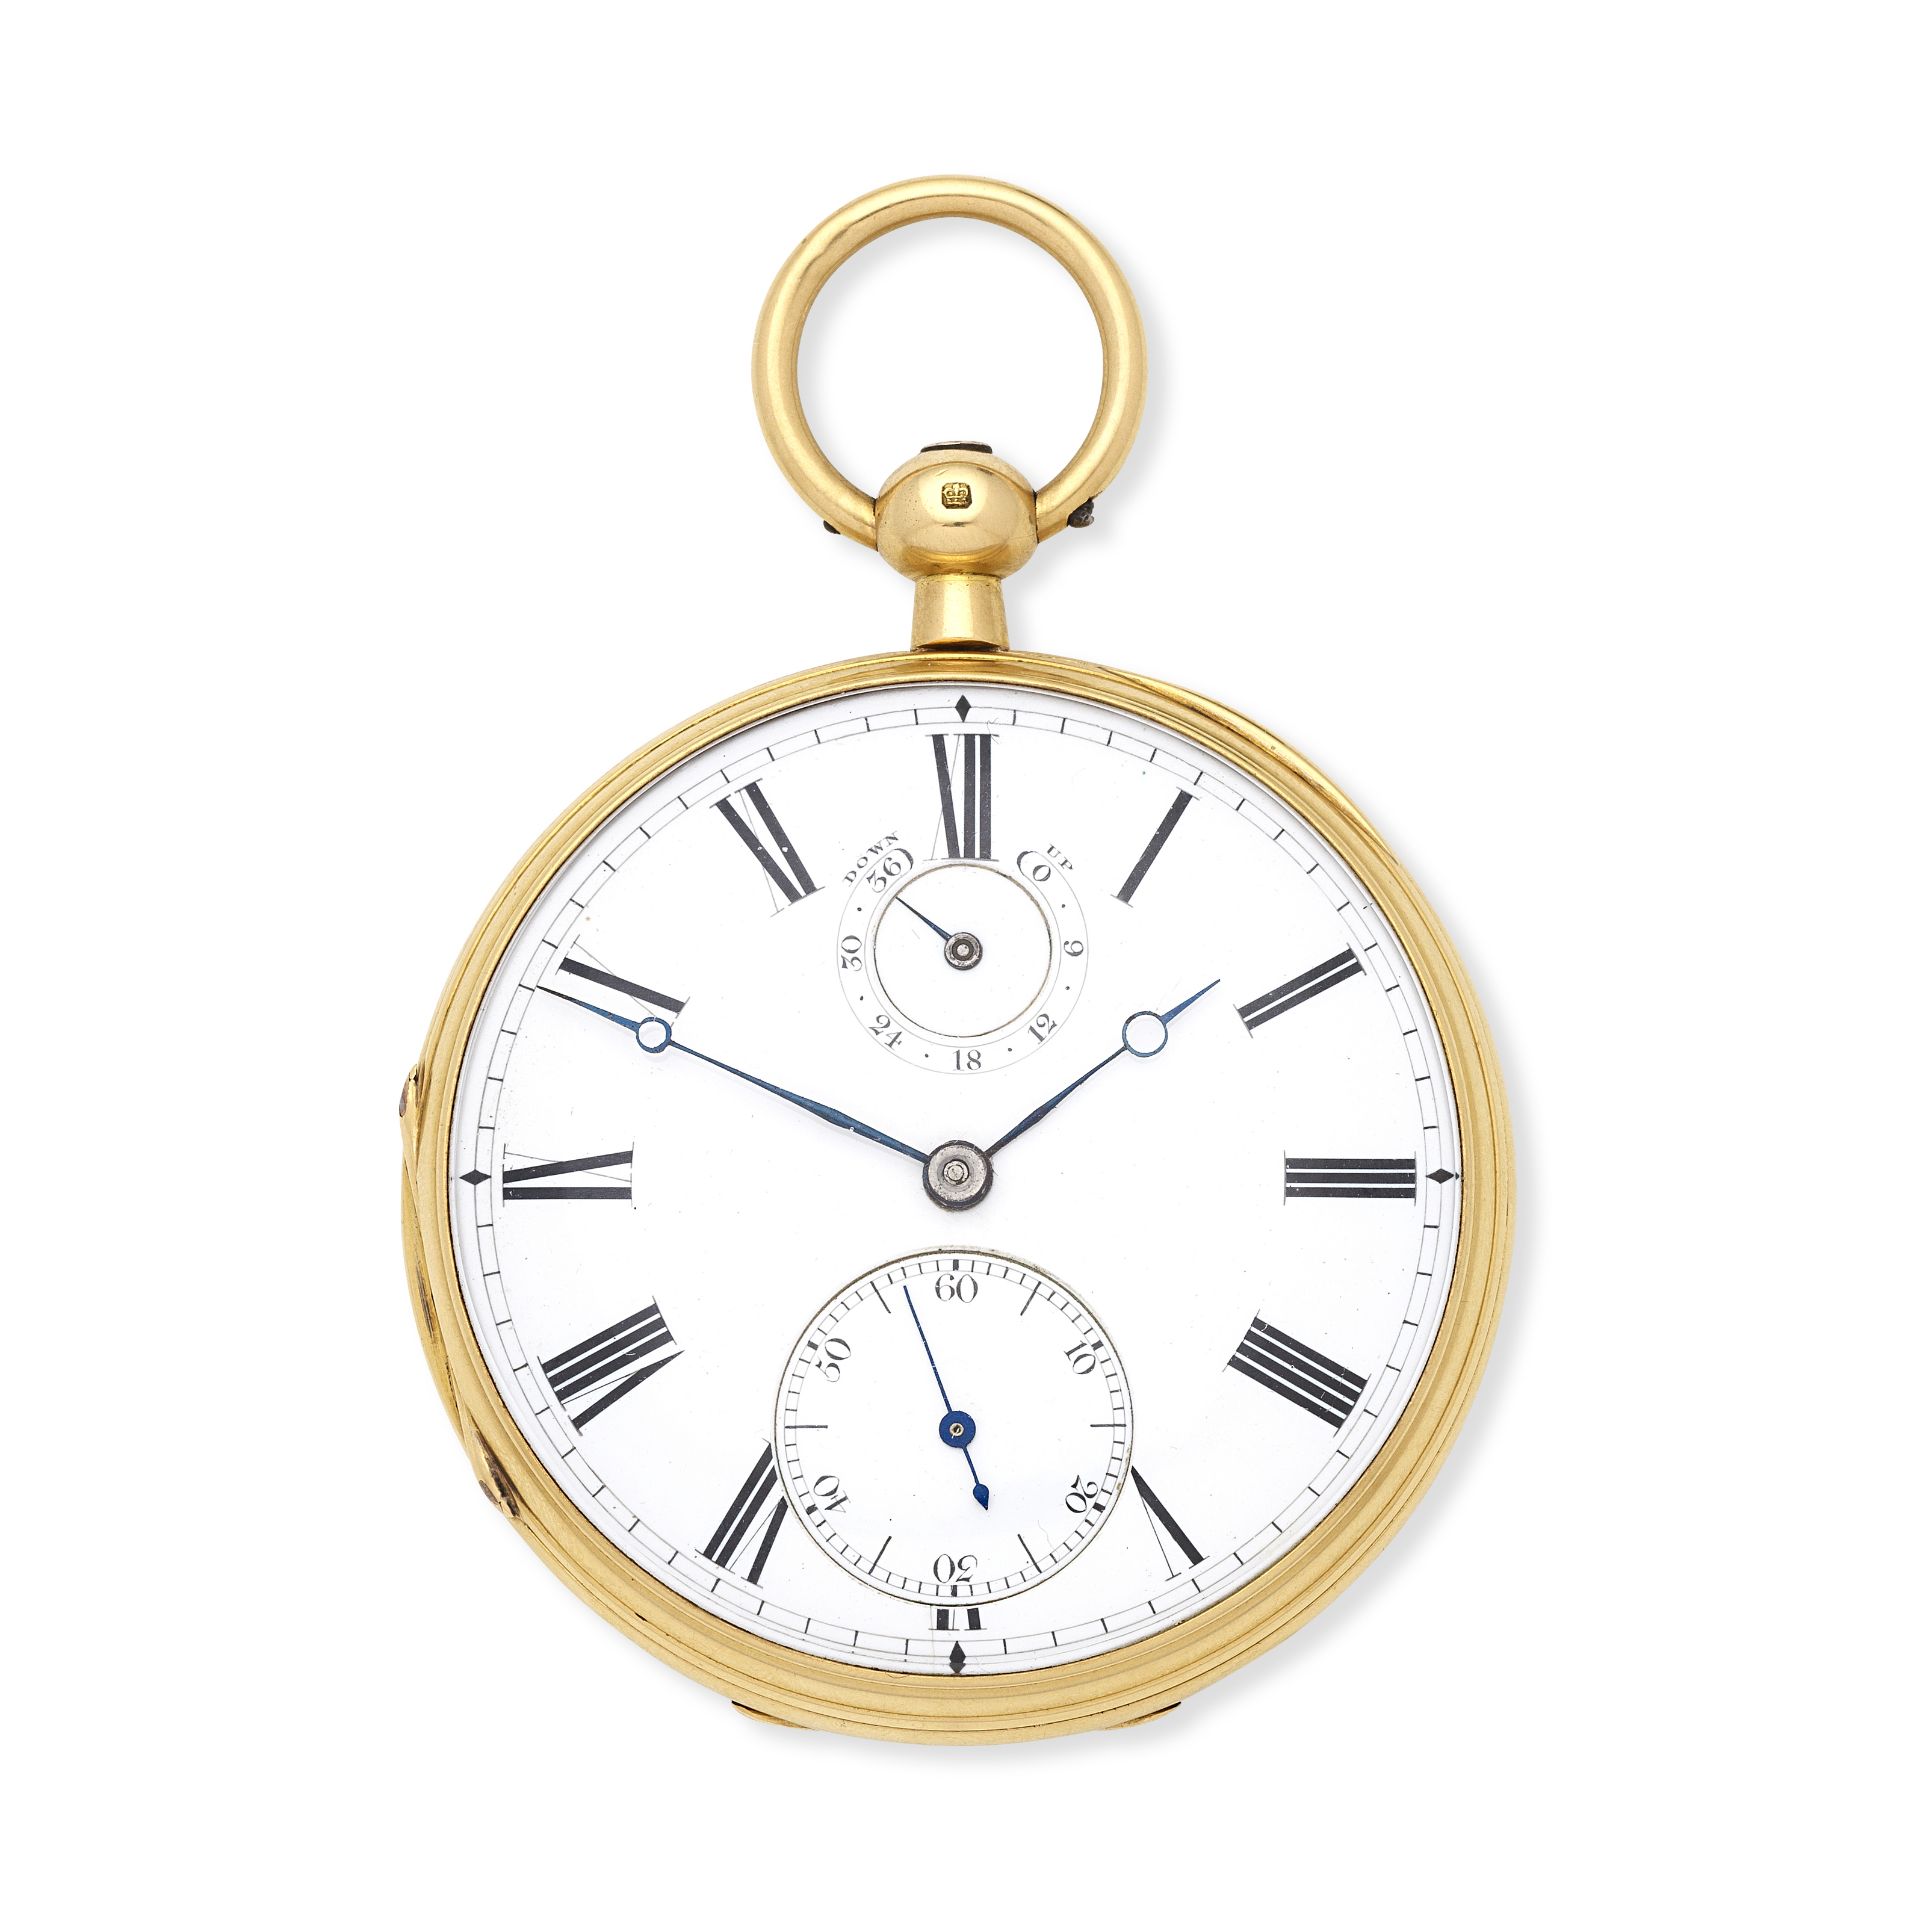 A & J Smith, Aberdeen. An 18K gold key wind open face pocket watch with up/down indication Londo...